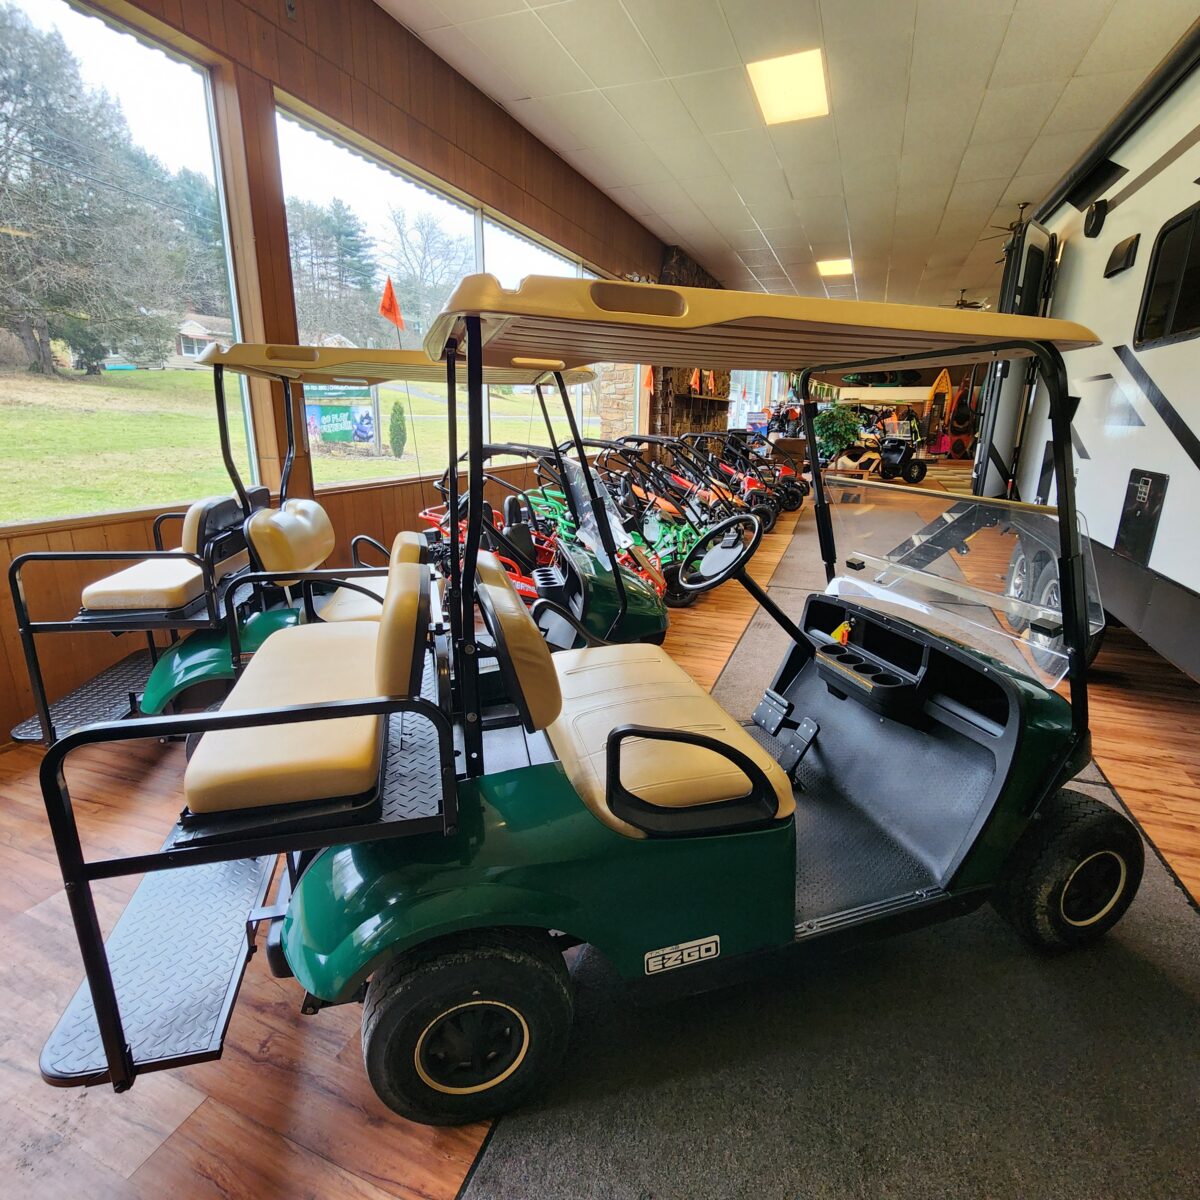 2018 EZGO TXT 48  Electric cart with the flip seat option